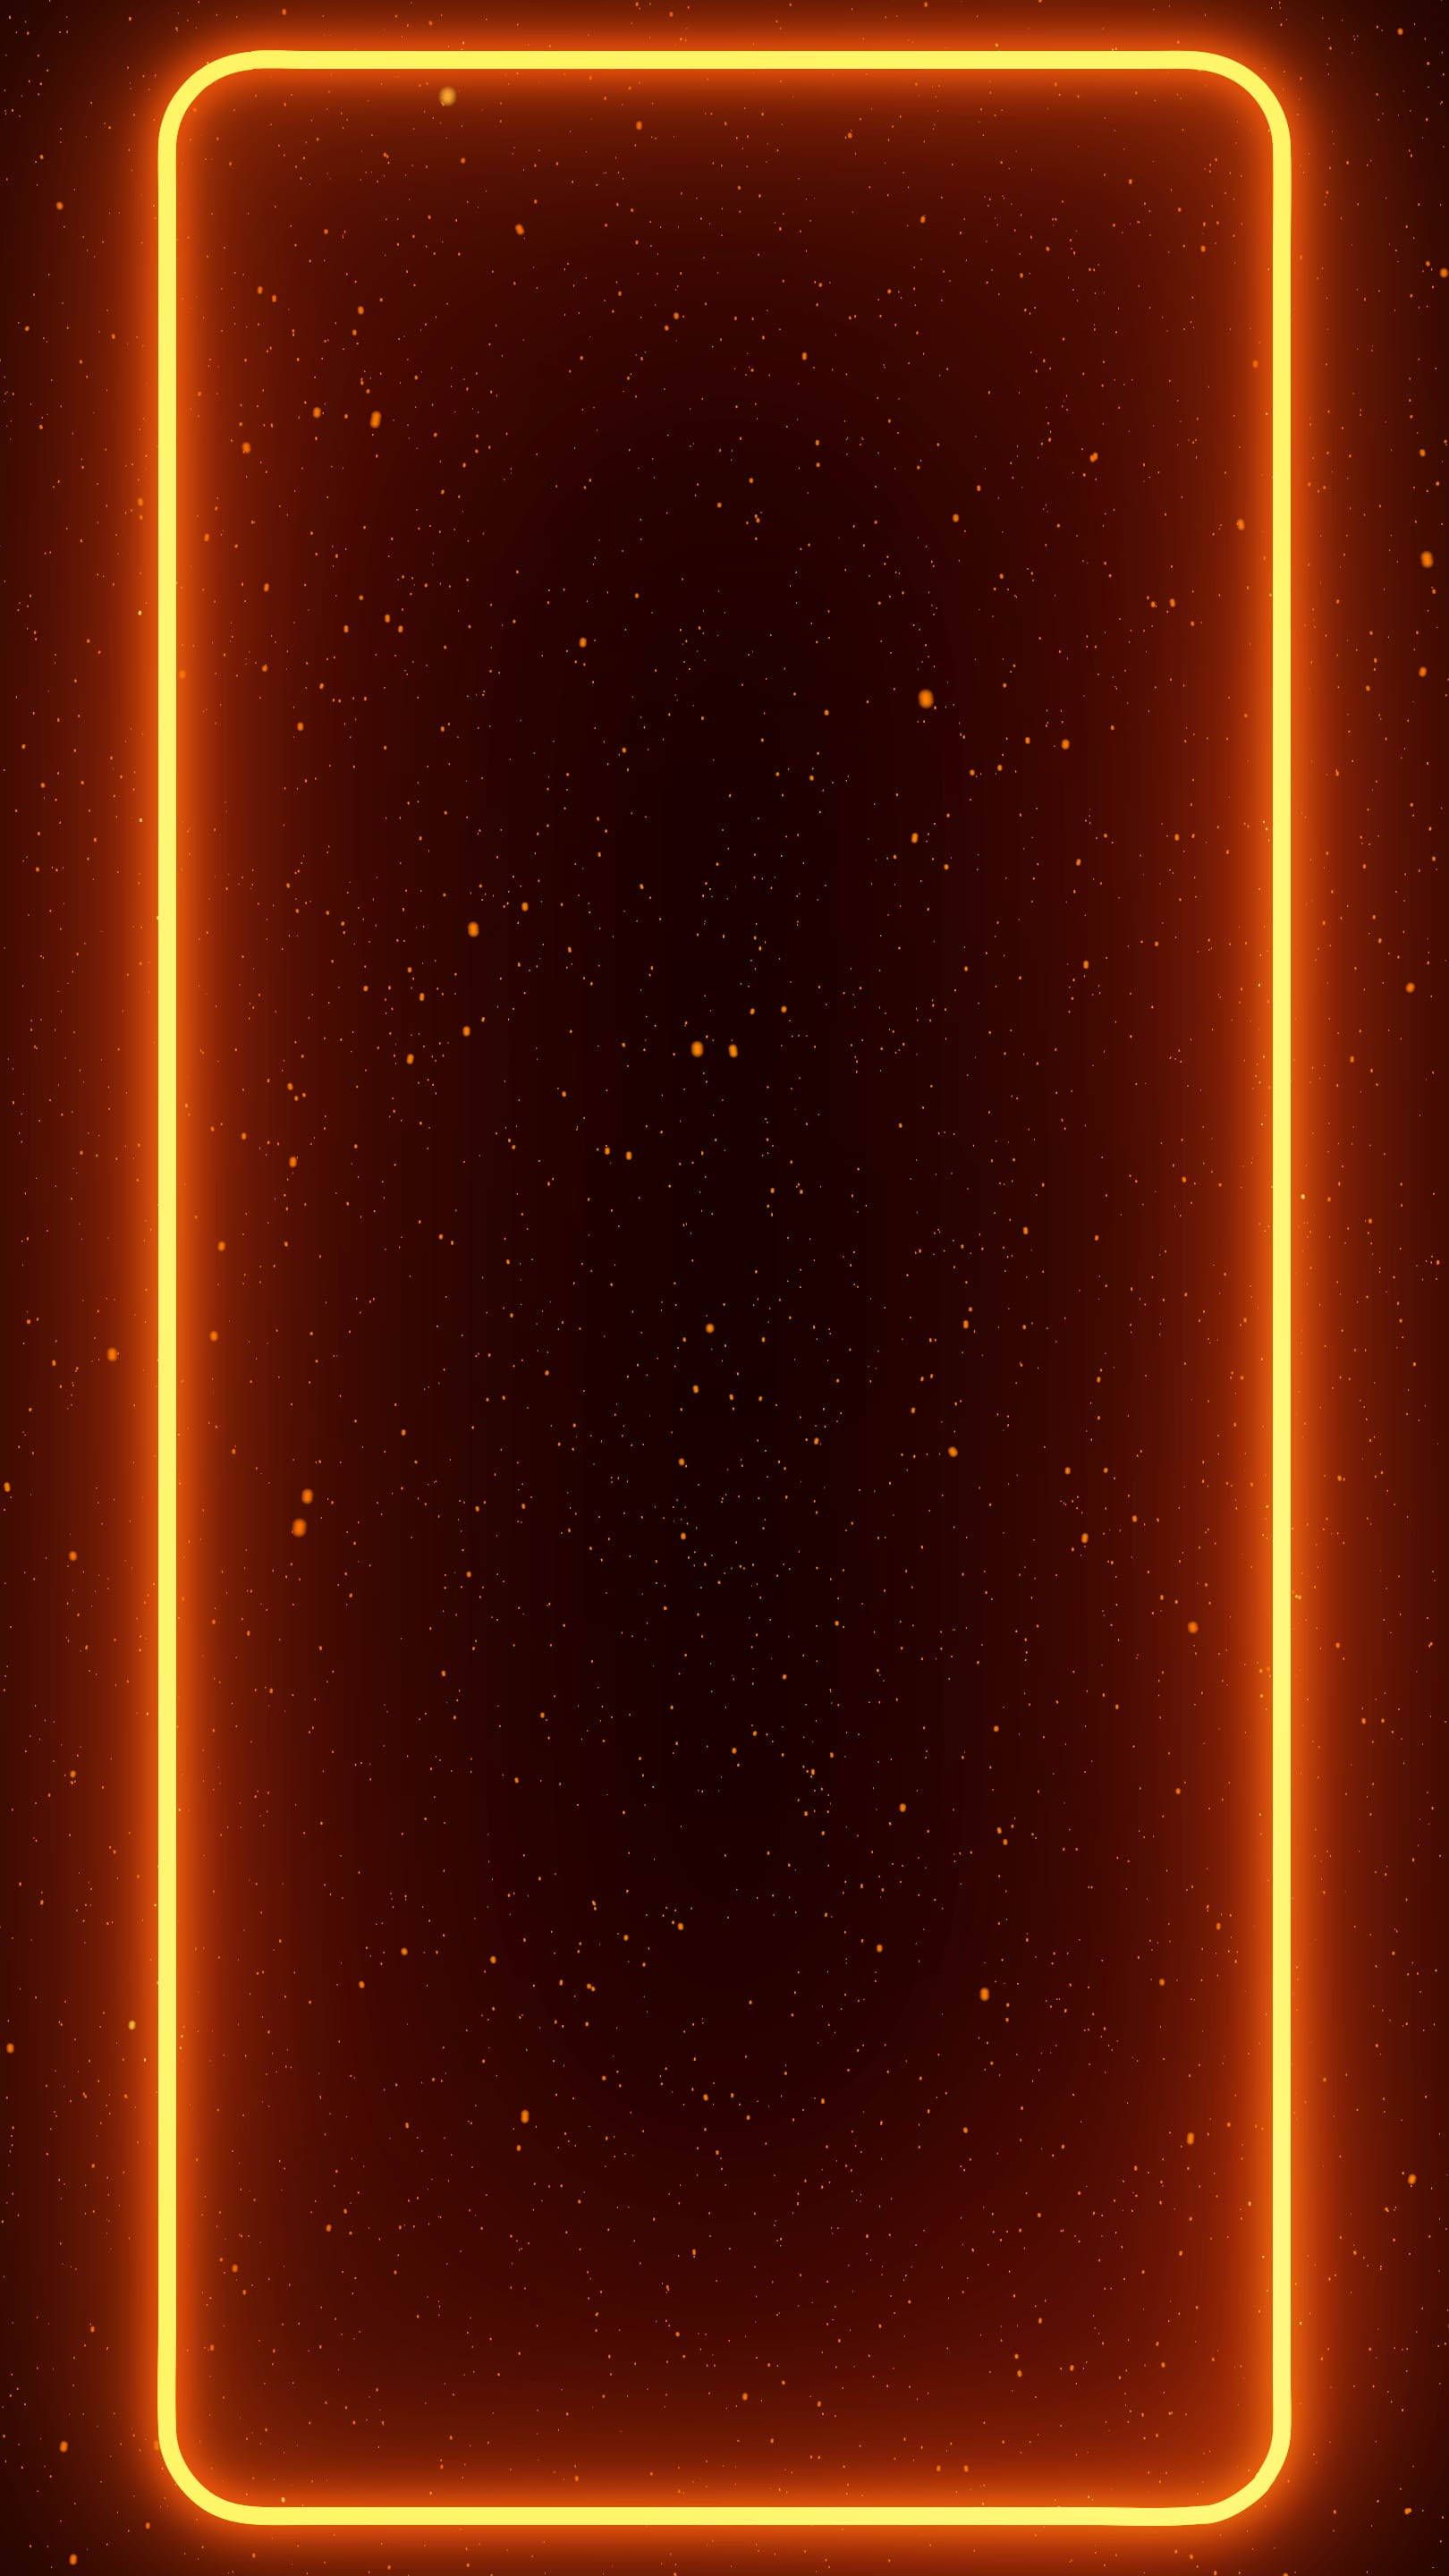 A neon frame with stars in the background - Neon orange